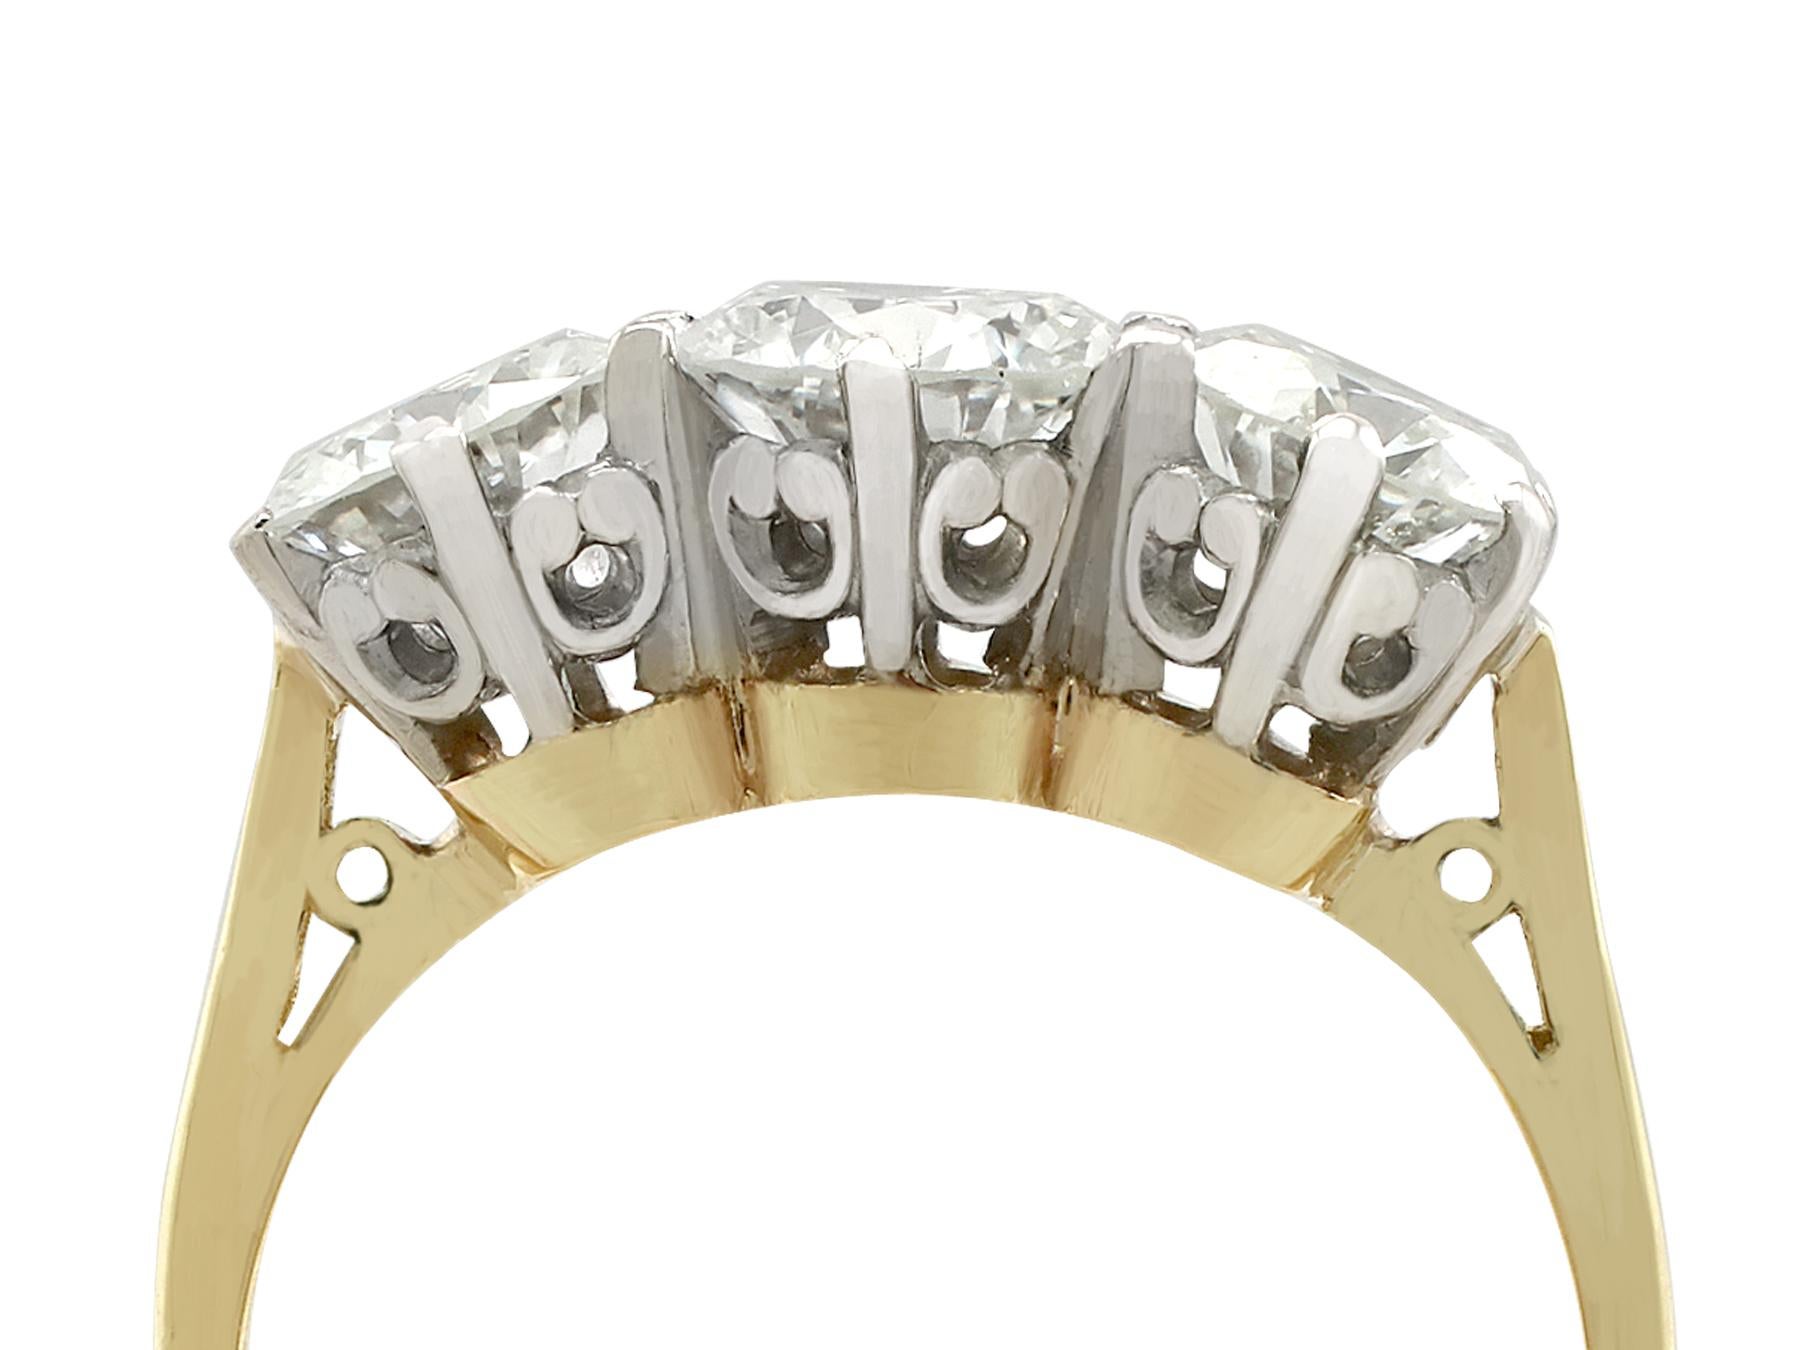 An impressive vintage 2.34 carat diamond and 18 karat yellow gold, 18 karat white gold set trilogy ring; part of our diverse diamond jewellery and estate jewelry collections.

This fine and impressive vintage trilogy diamond ring has been crafted in